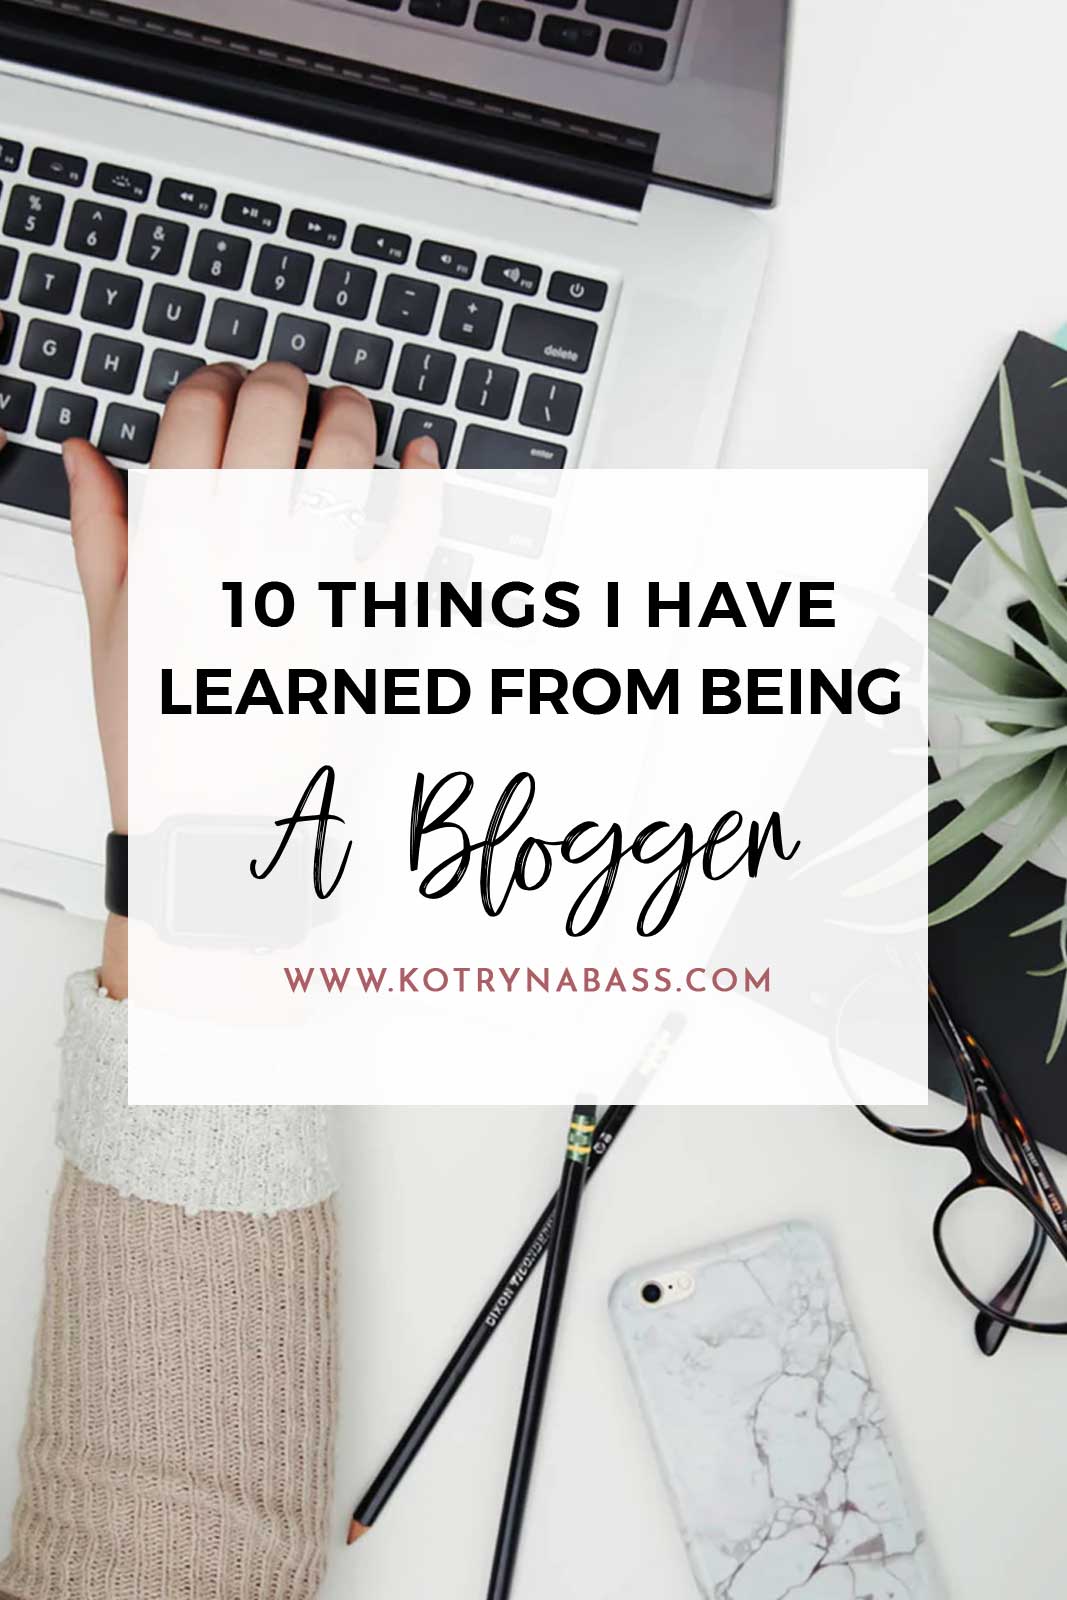 I love blogging for a living! Seriously, I feel grateful every single day to know that my work allows me to have all the freedom I need & constantly keeps me motivated to grow. I’ve been blogging for over five years now & today I’d like to share some of the things I’ve learned so far from running my own blog.